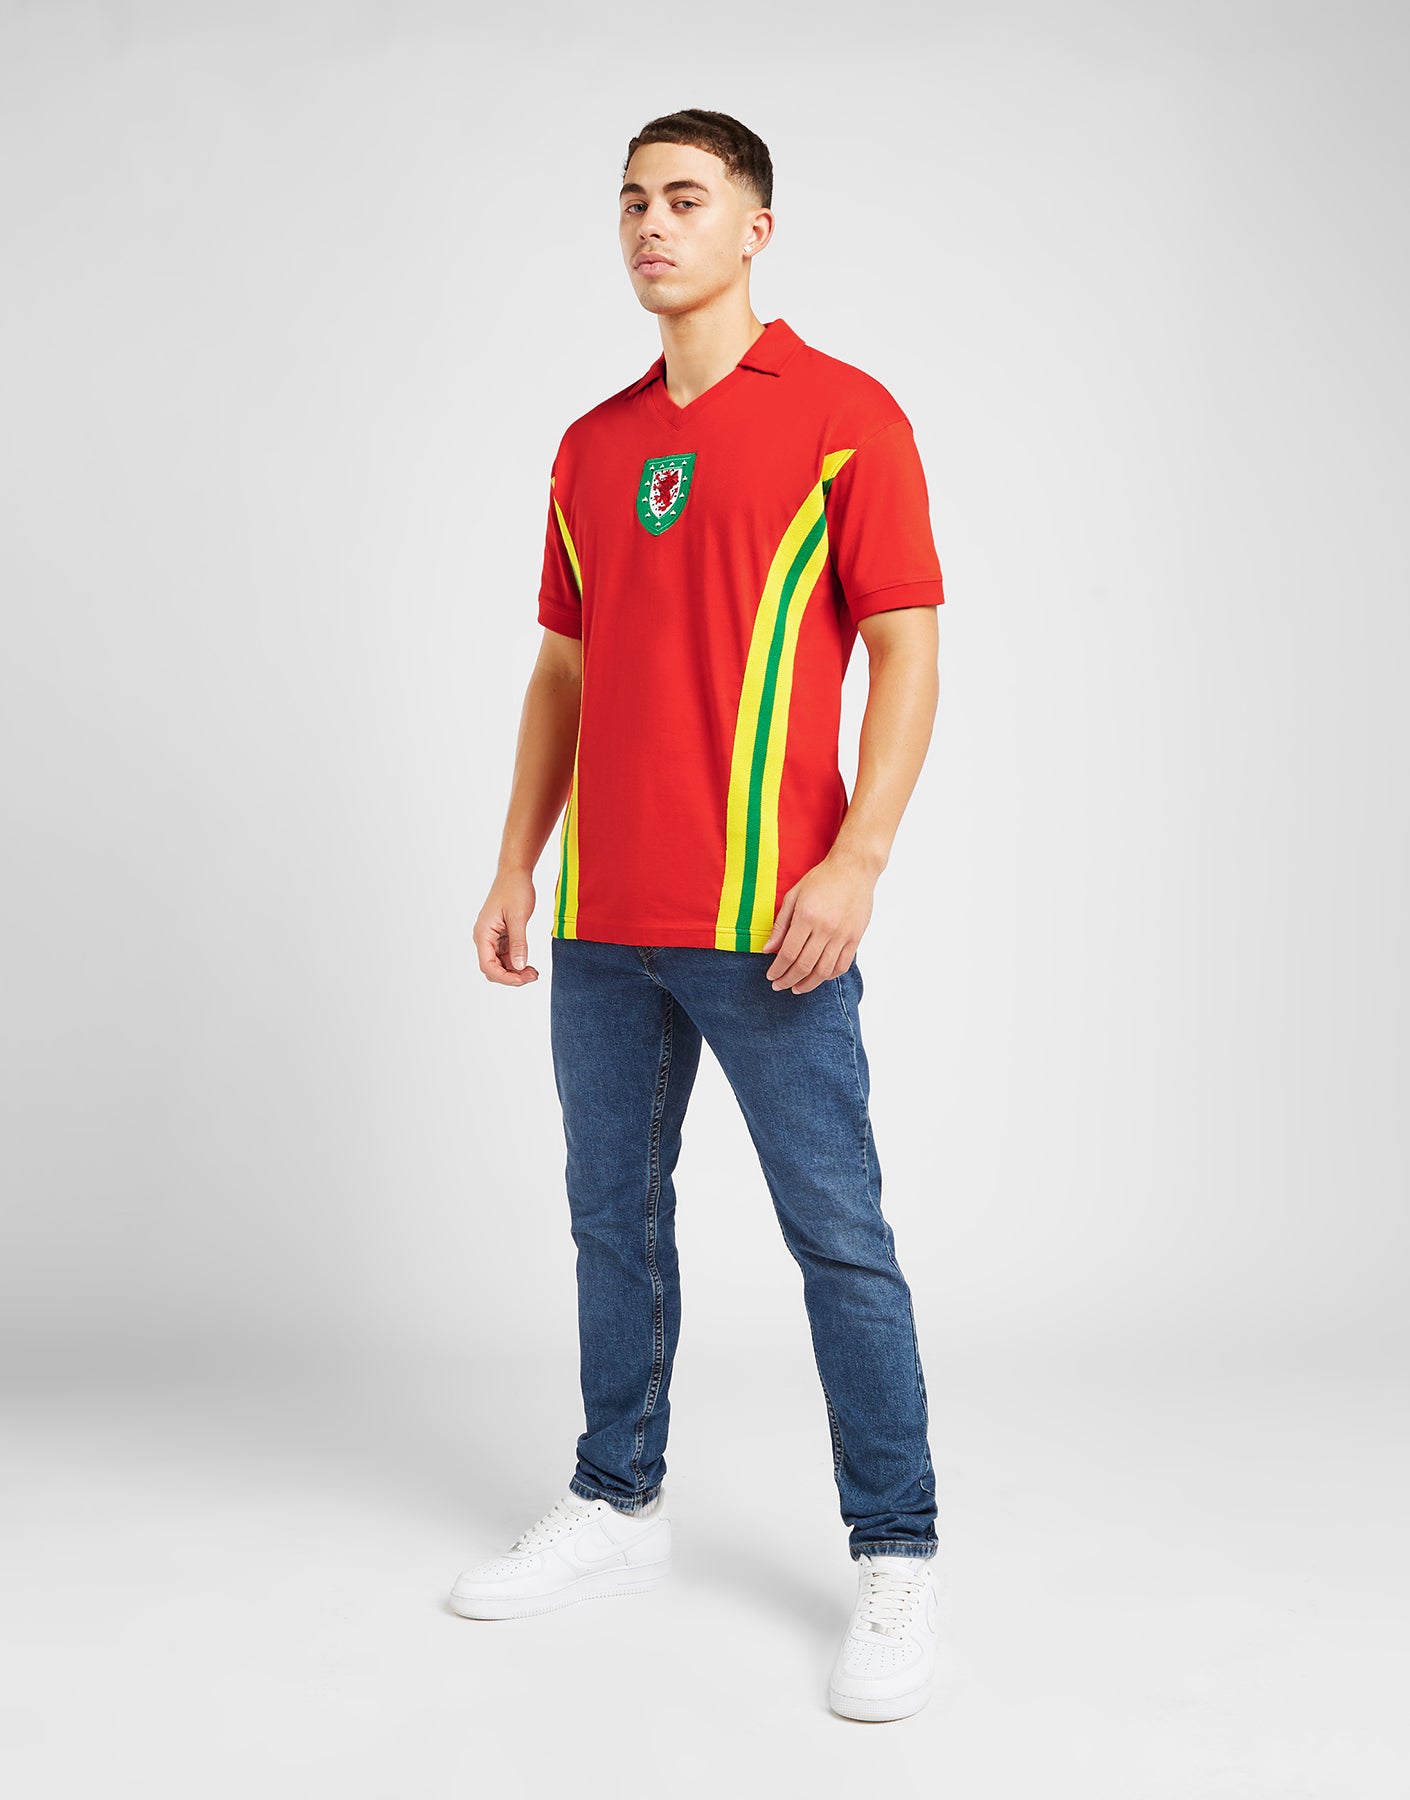 Official Team Wales 1976 Retro Jersey - Red - The World Football Store